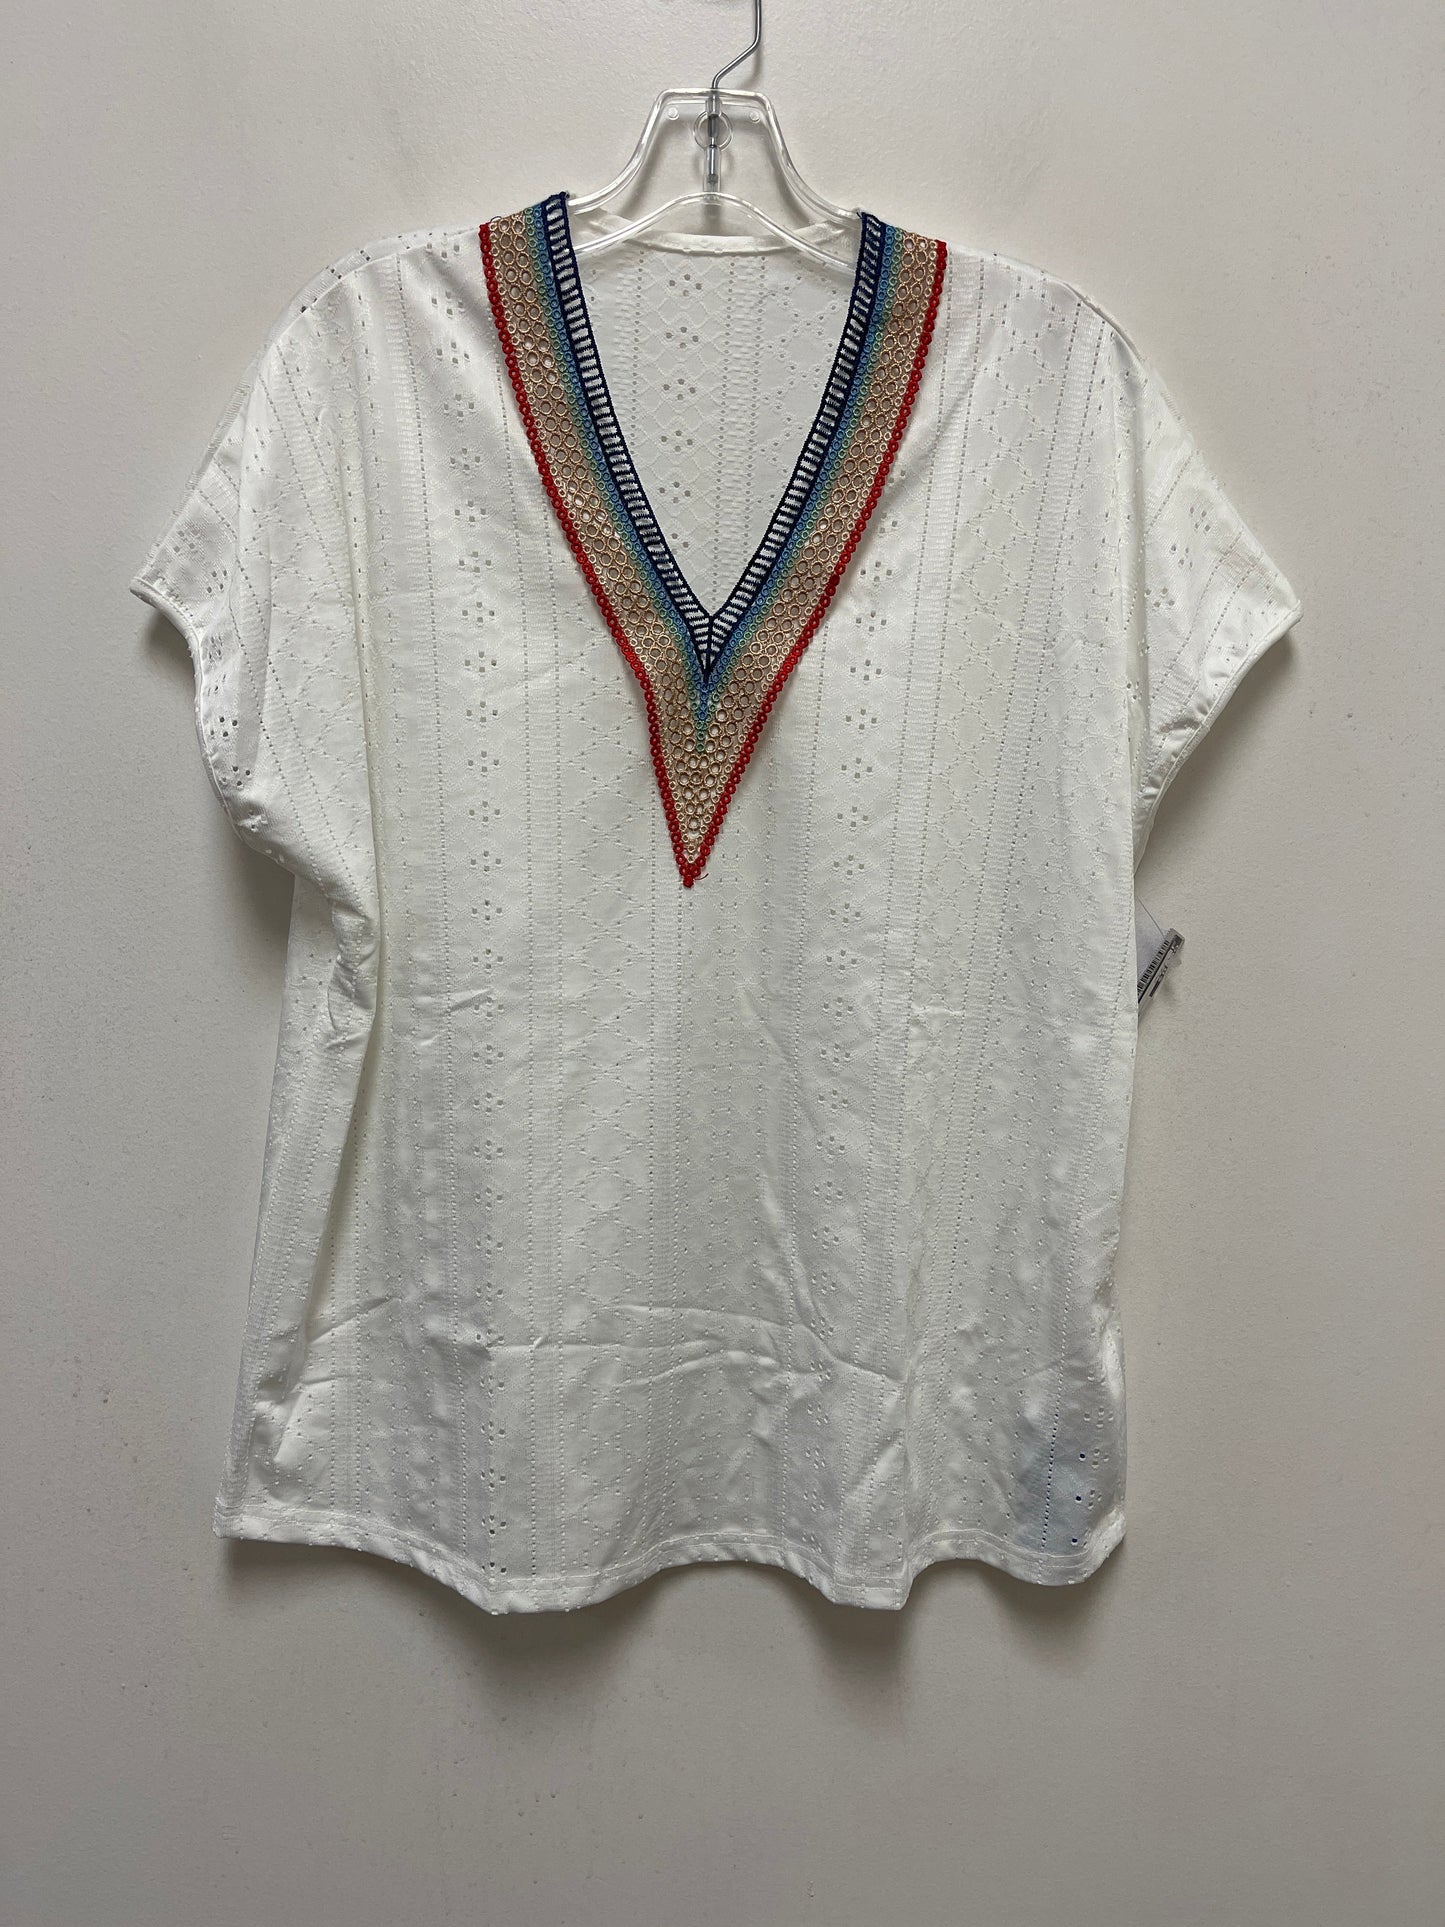 White Top Short Sleeve Cupshe, Size Xl